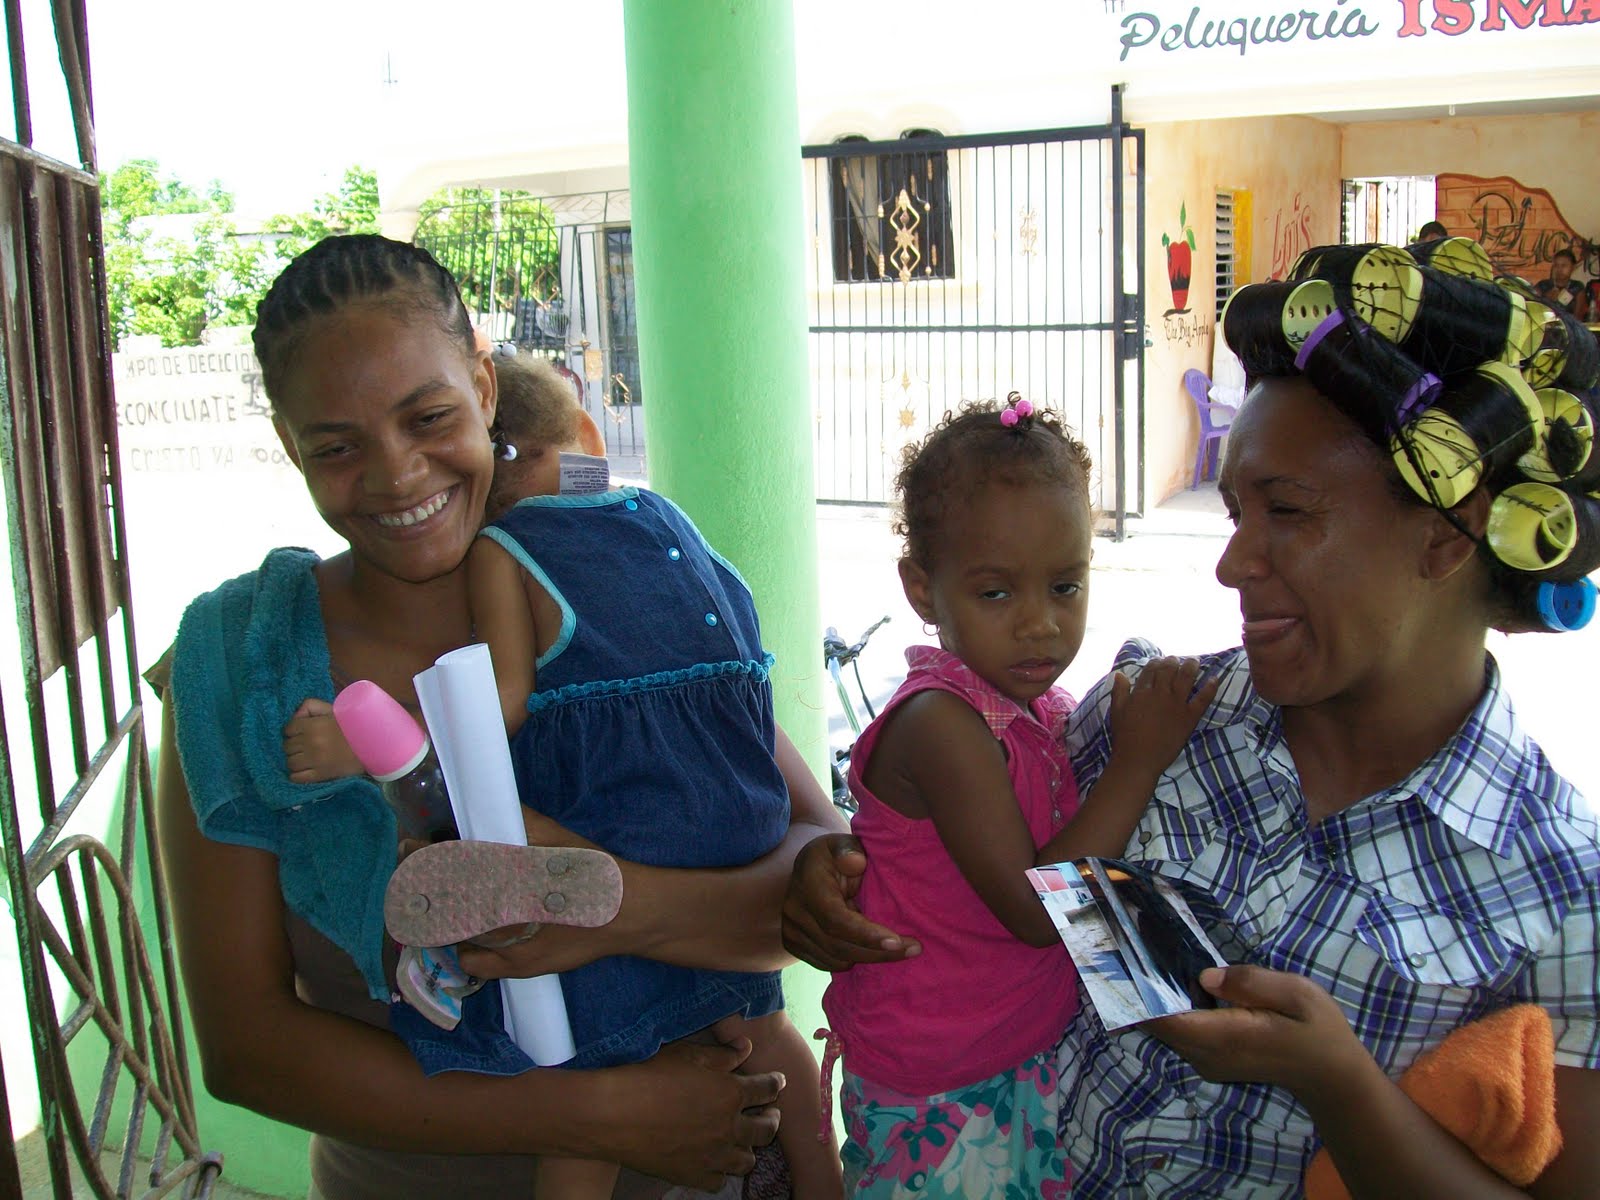 Lutherans in the Dominican Republic: Mother's Day, Santiago, DR 2010